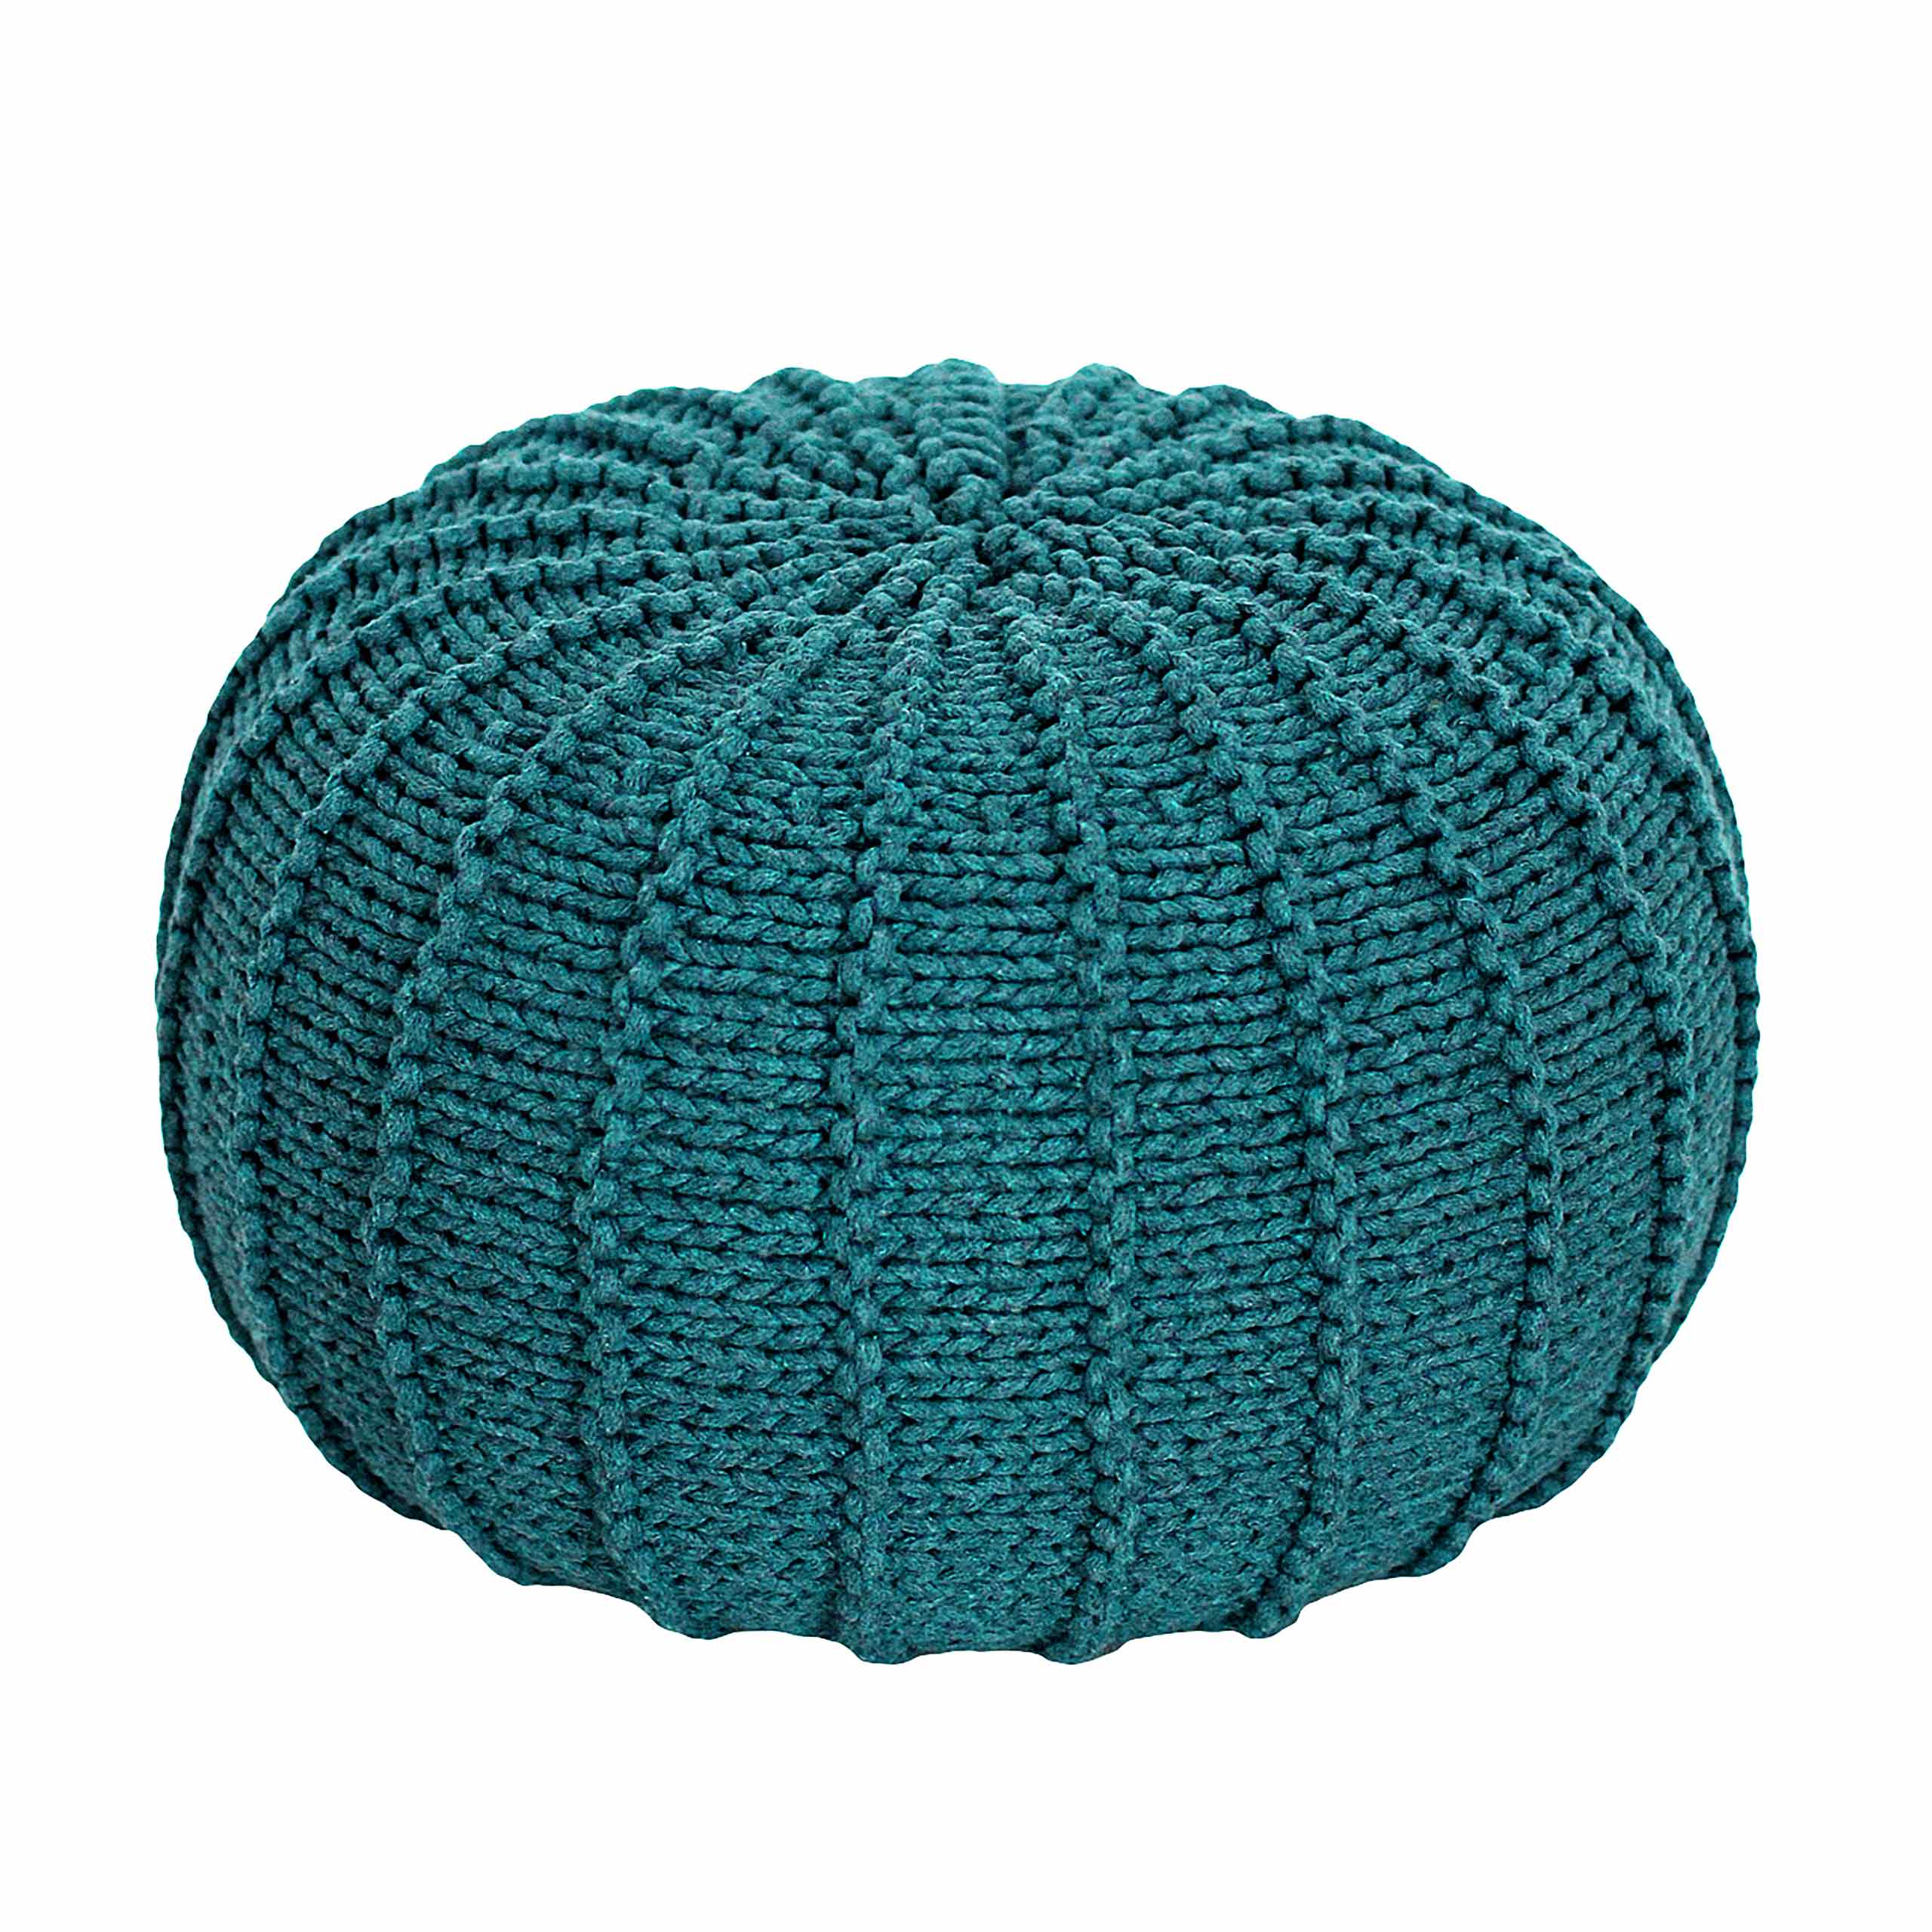 Knitted pouffe, Small | OCEAN BLUE